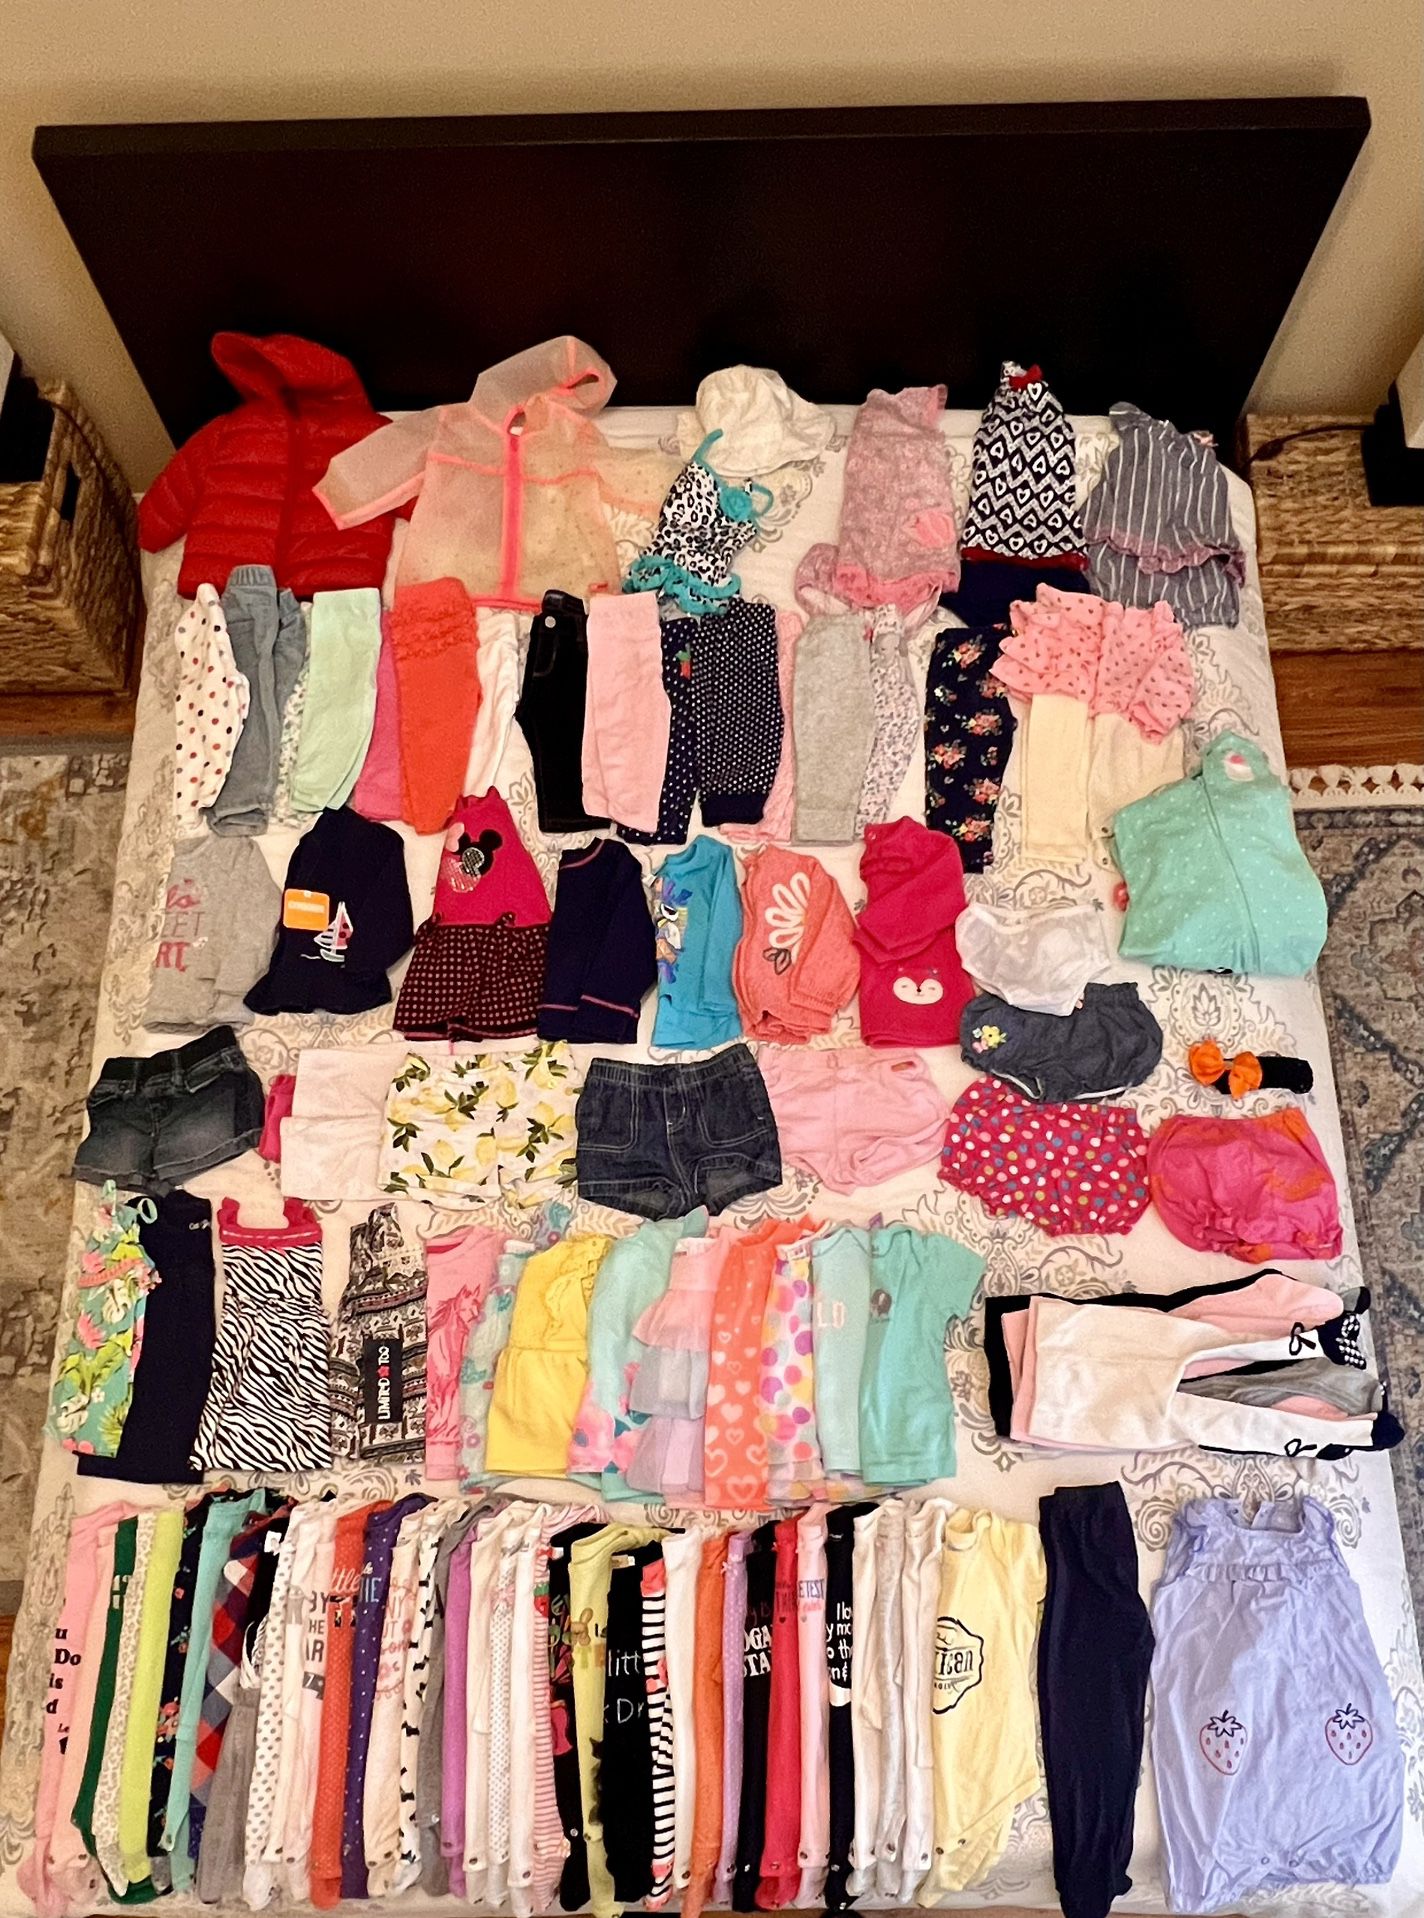 6-24 Month Girl - Clothing / Clothes / Dresses / Shirts / Shorts / Skirts / Pants / Onesies / Jackets / Sweaters